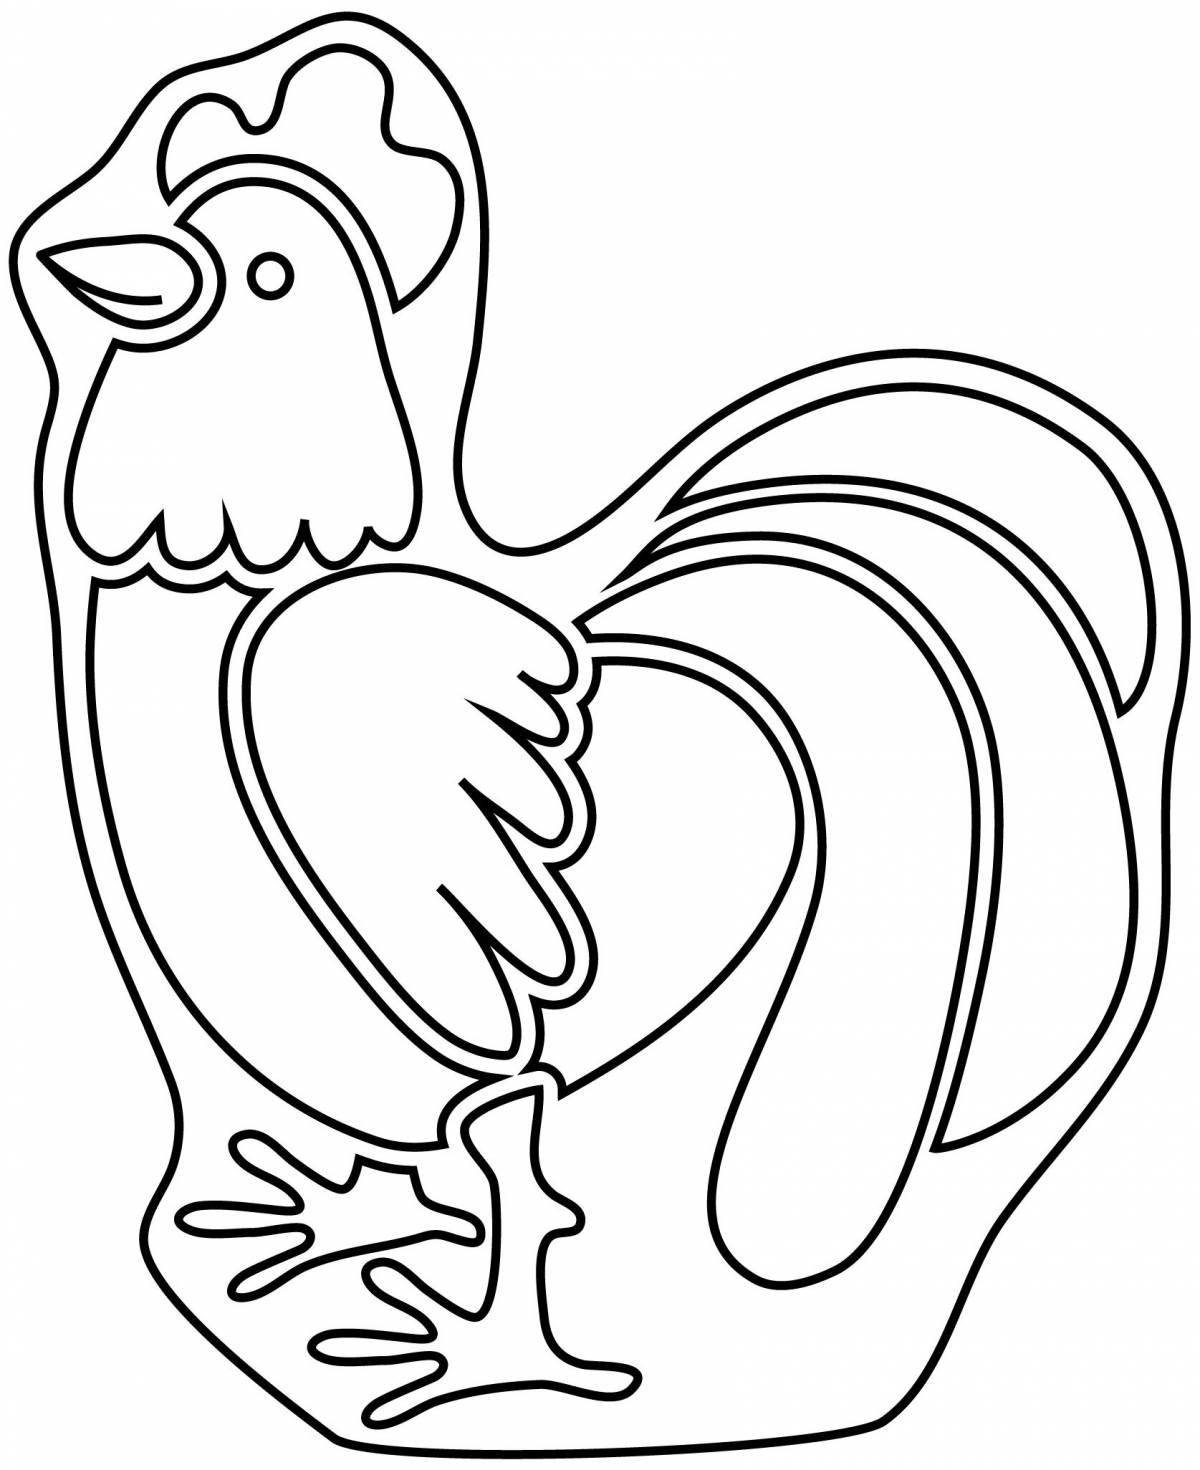 Glowing rooster coloring page